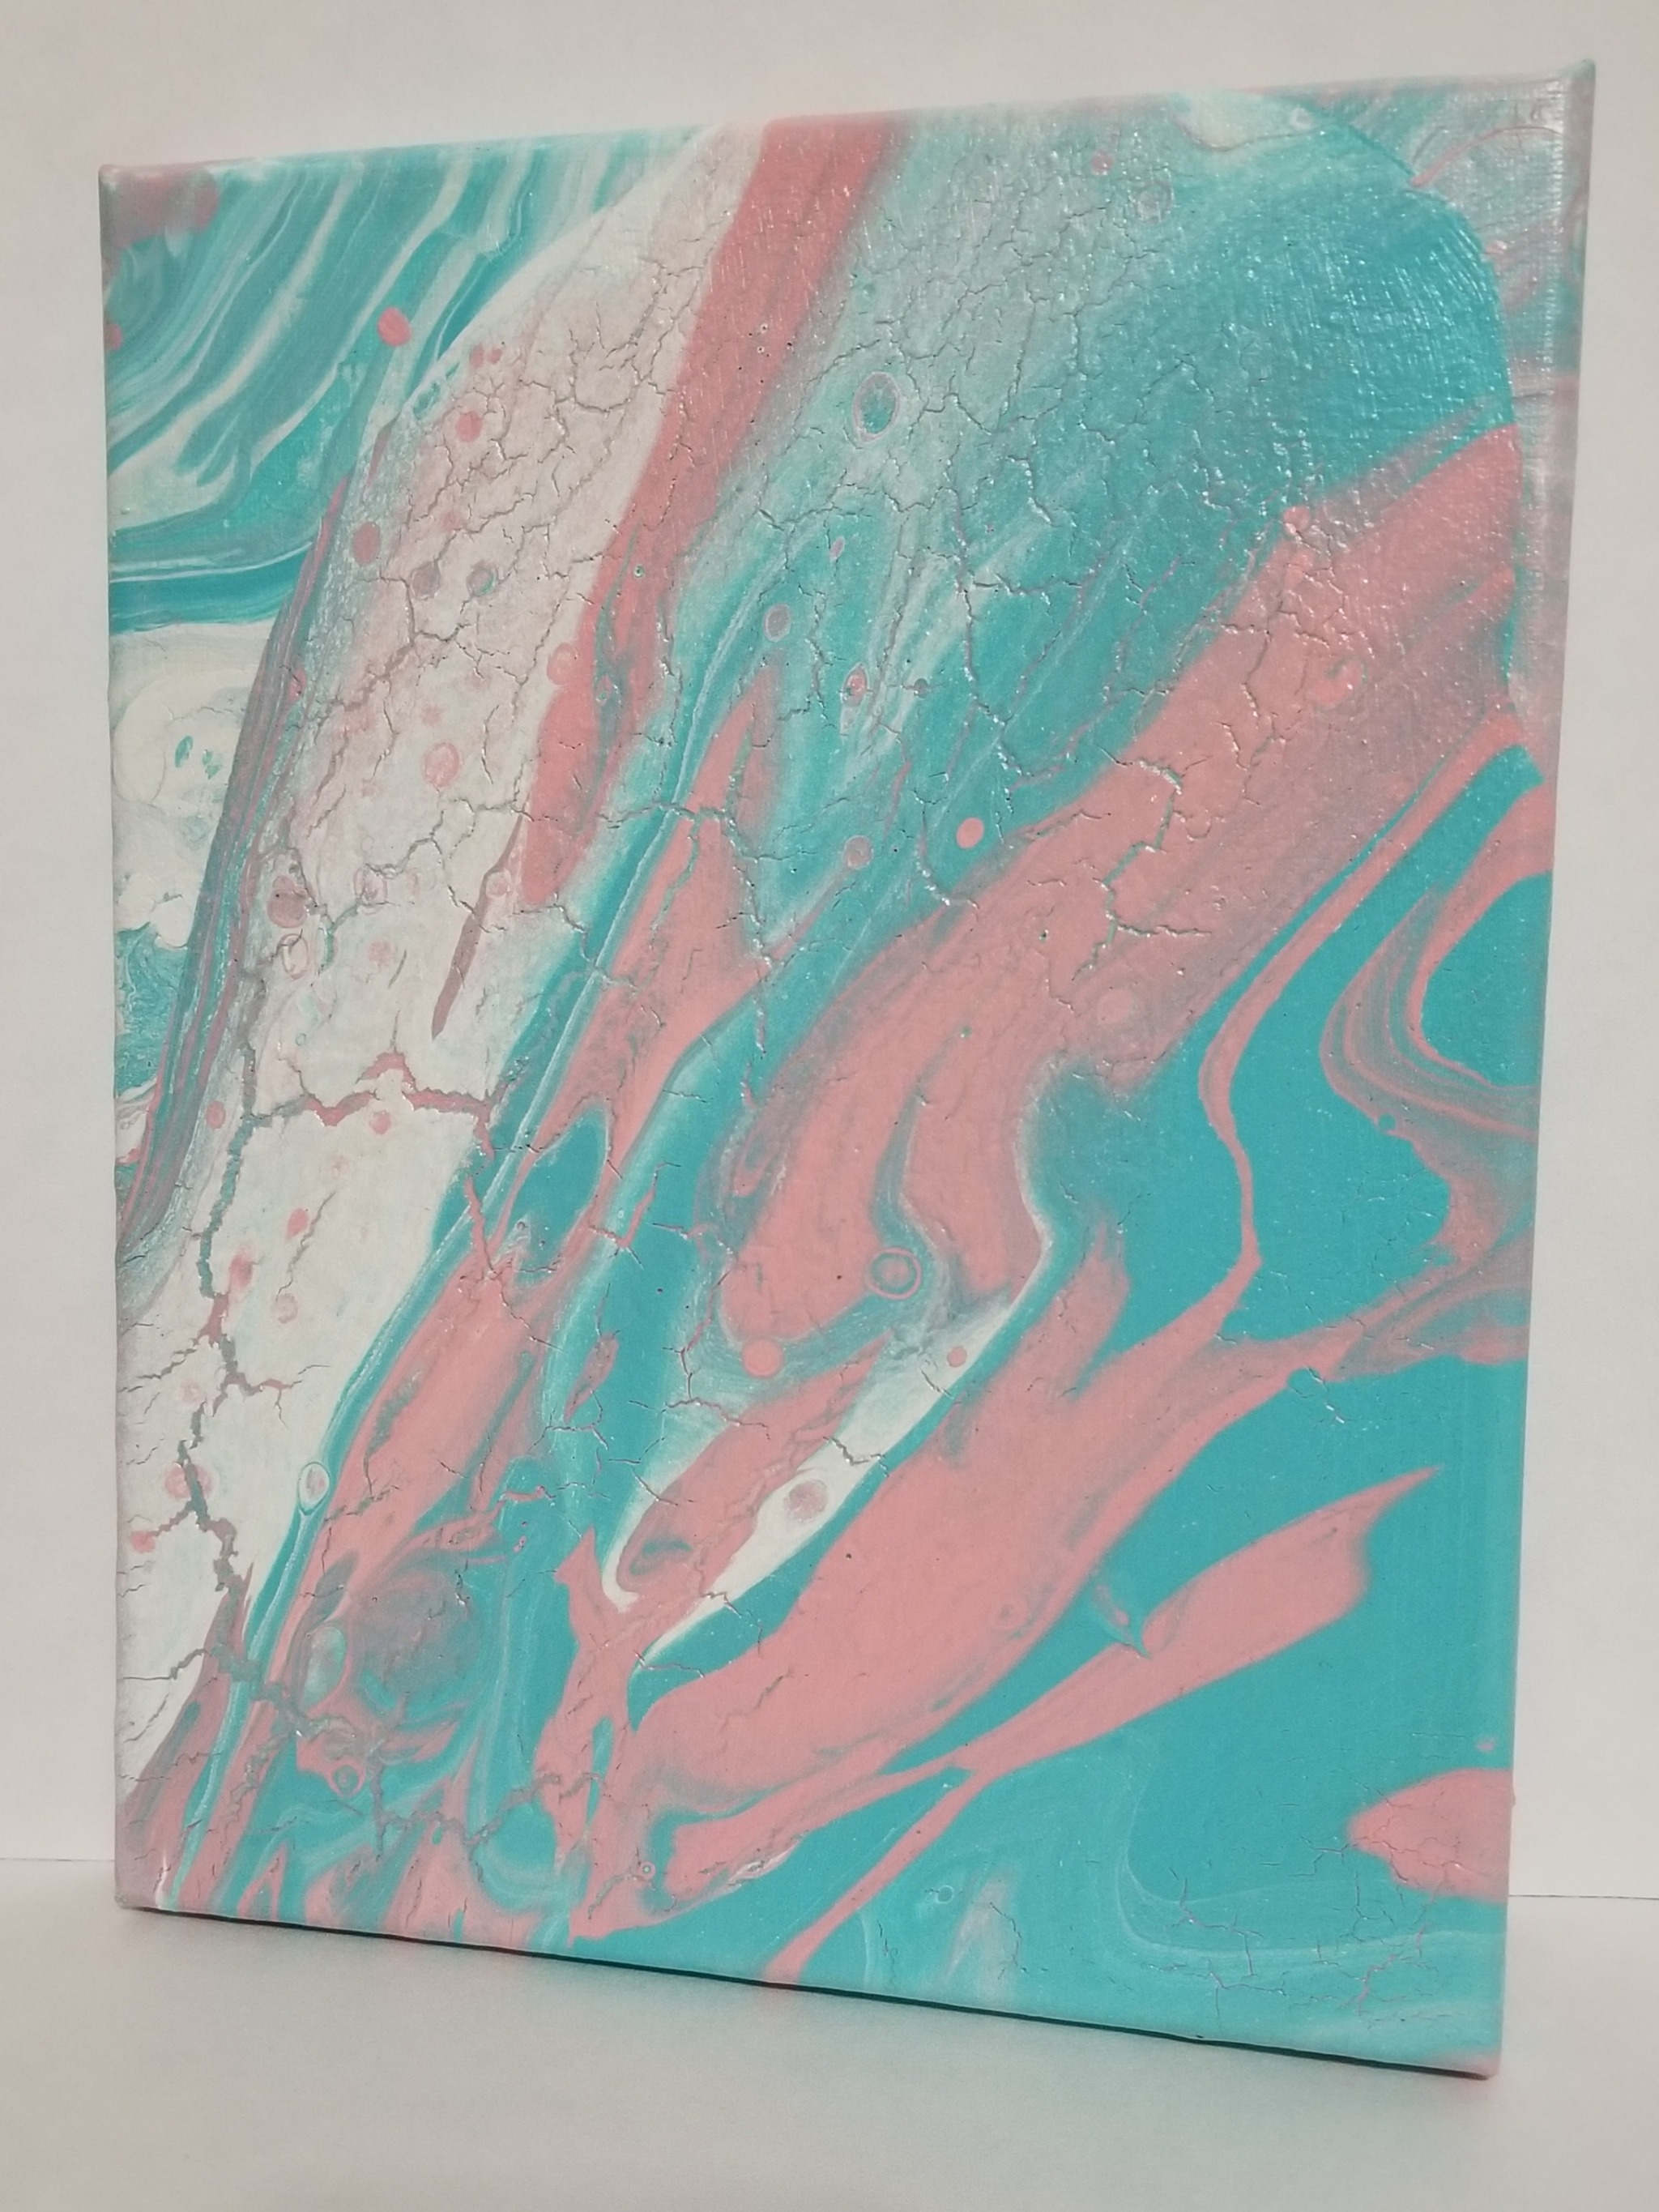 ffx-2-2:fineartfolk:“Genderfluids” is a piece done by both of us as a means of conversation over our trans experiences as a trans man and nonbinary person. Using the colors of the trans pride flag, we combined paint with soap, alcohol, and